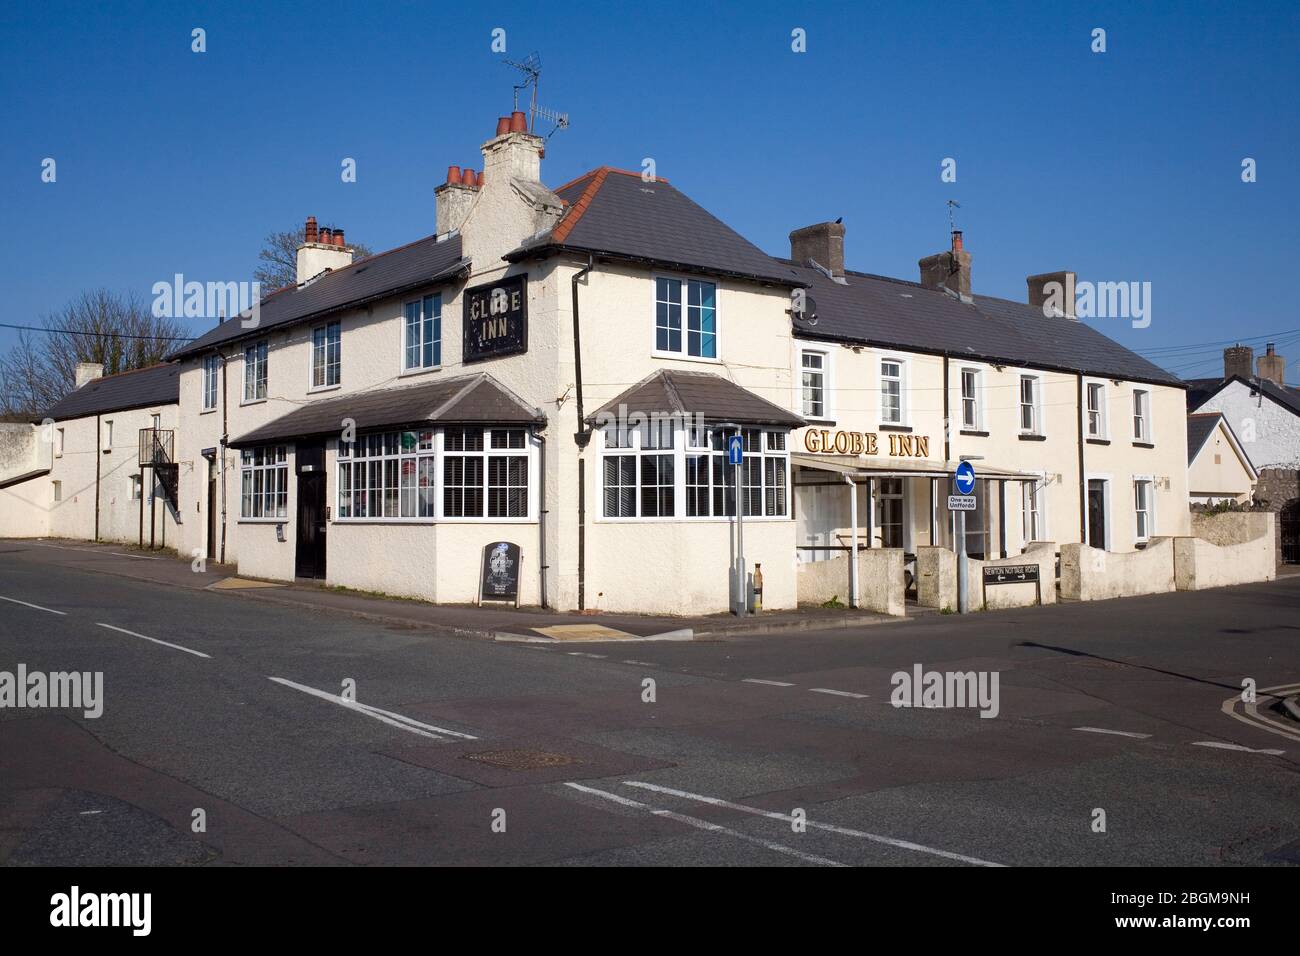 The Globe Inn public house and restaurant on the corner of Bridgend Road and Newton Nottage road in Newton village, Porthcawl Stock Photo